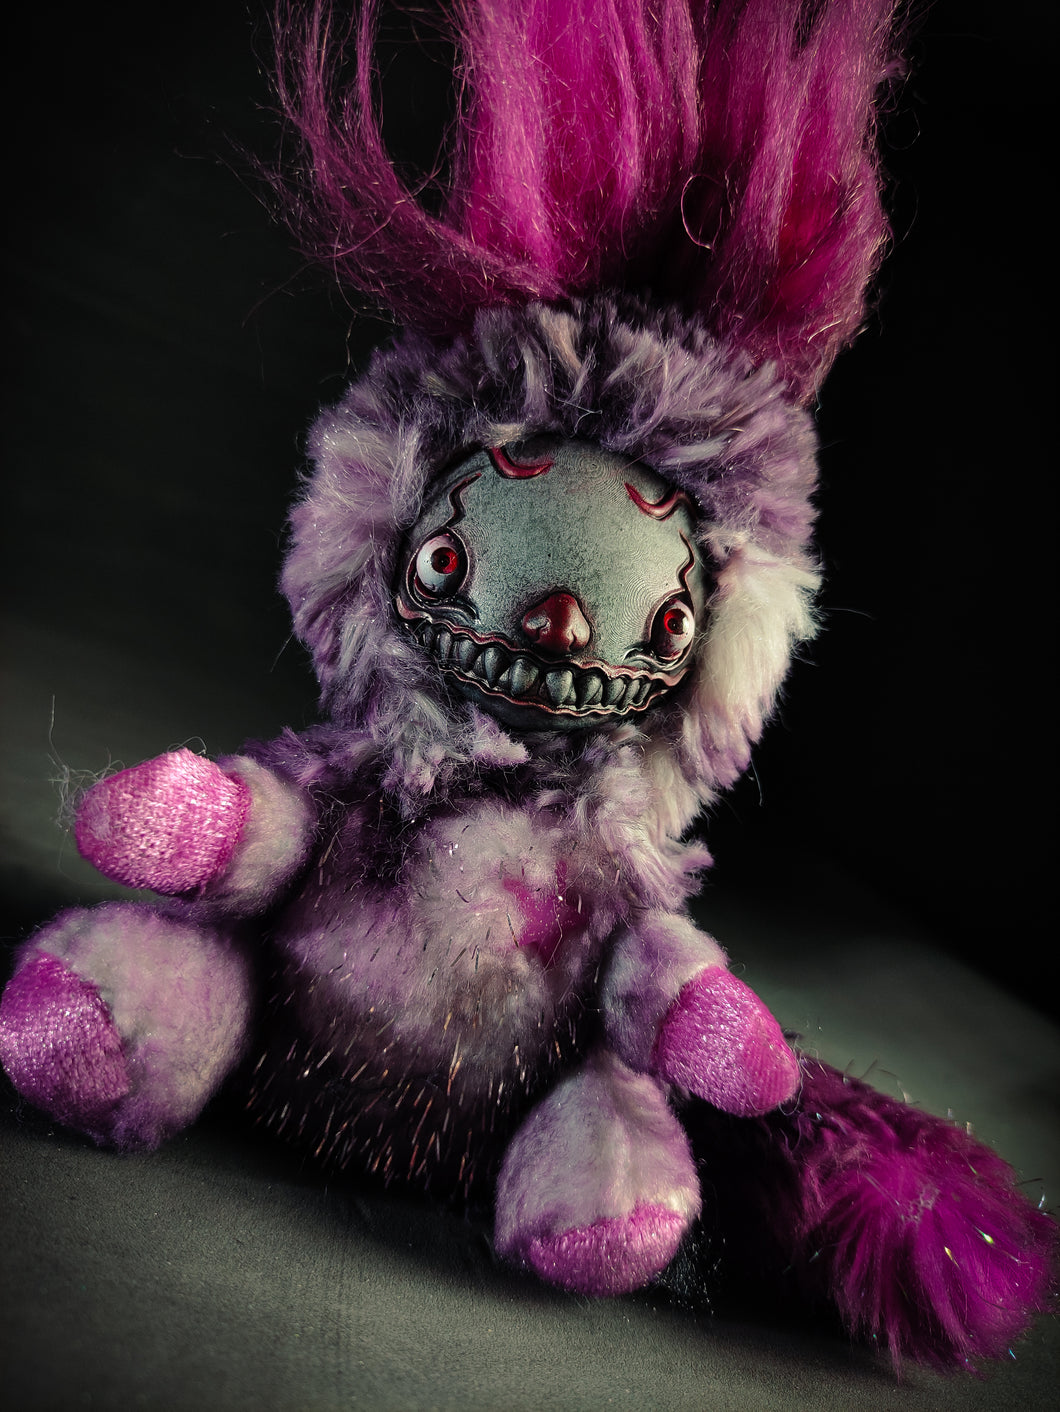 FRIEND Pantomime Peach Redux - Cryptid Art Doll Plush Toy